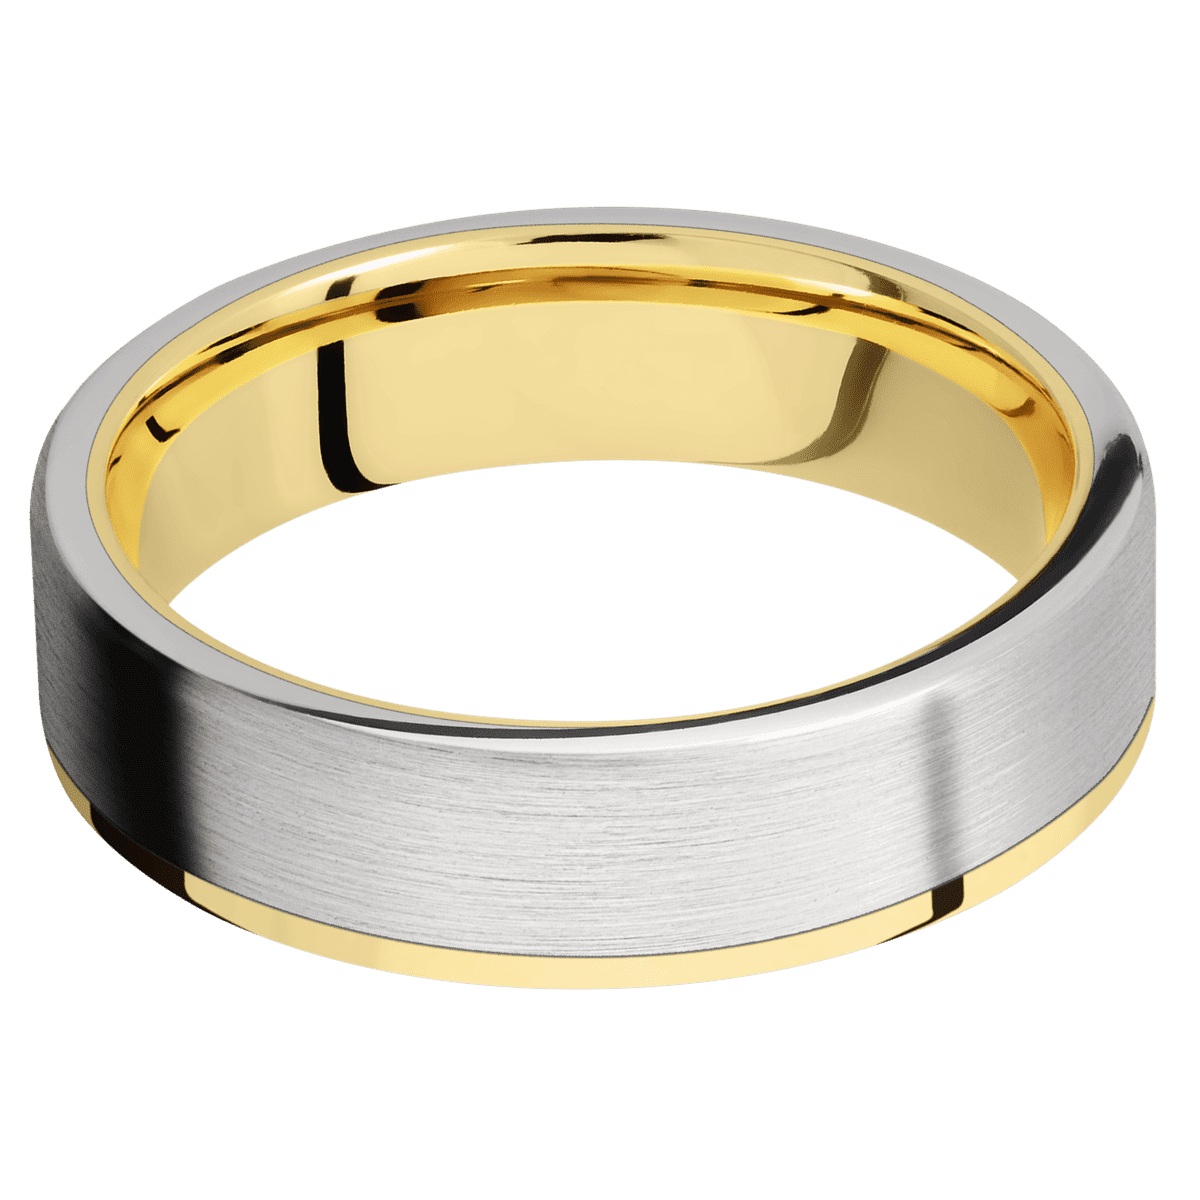 14K Yellow Gold with Polish Finish and Cobalt Chrome Inlay